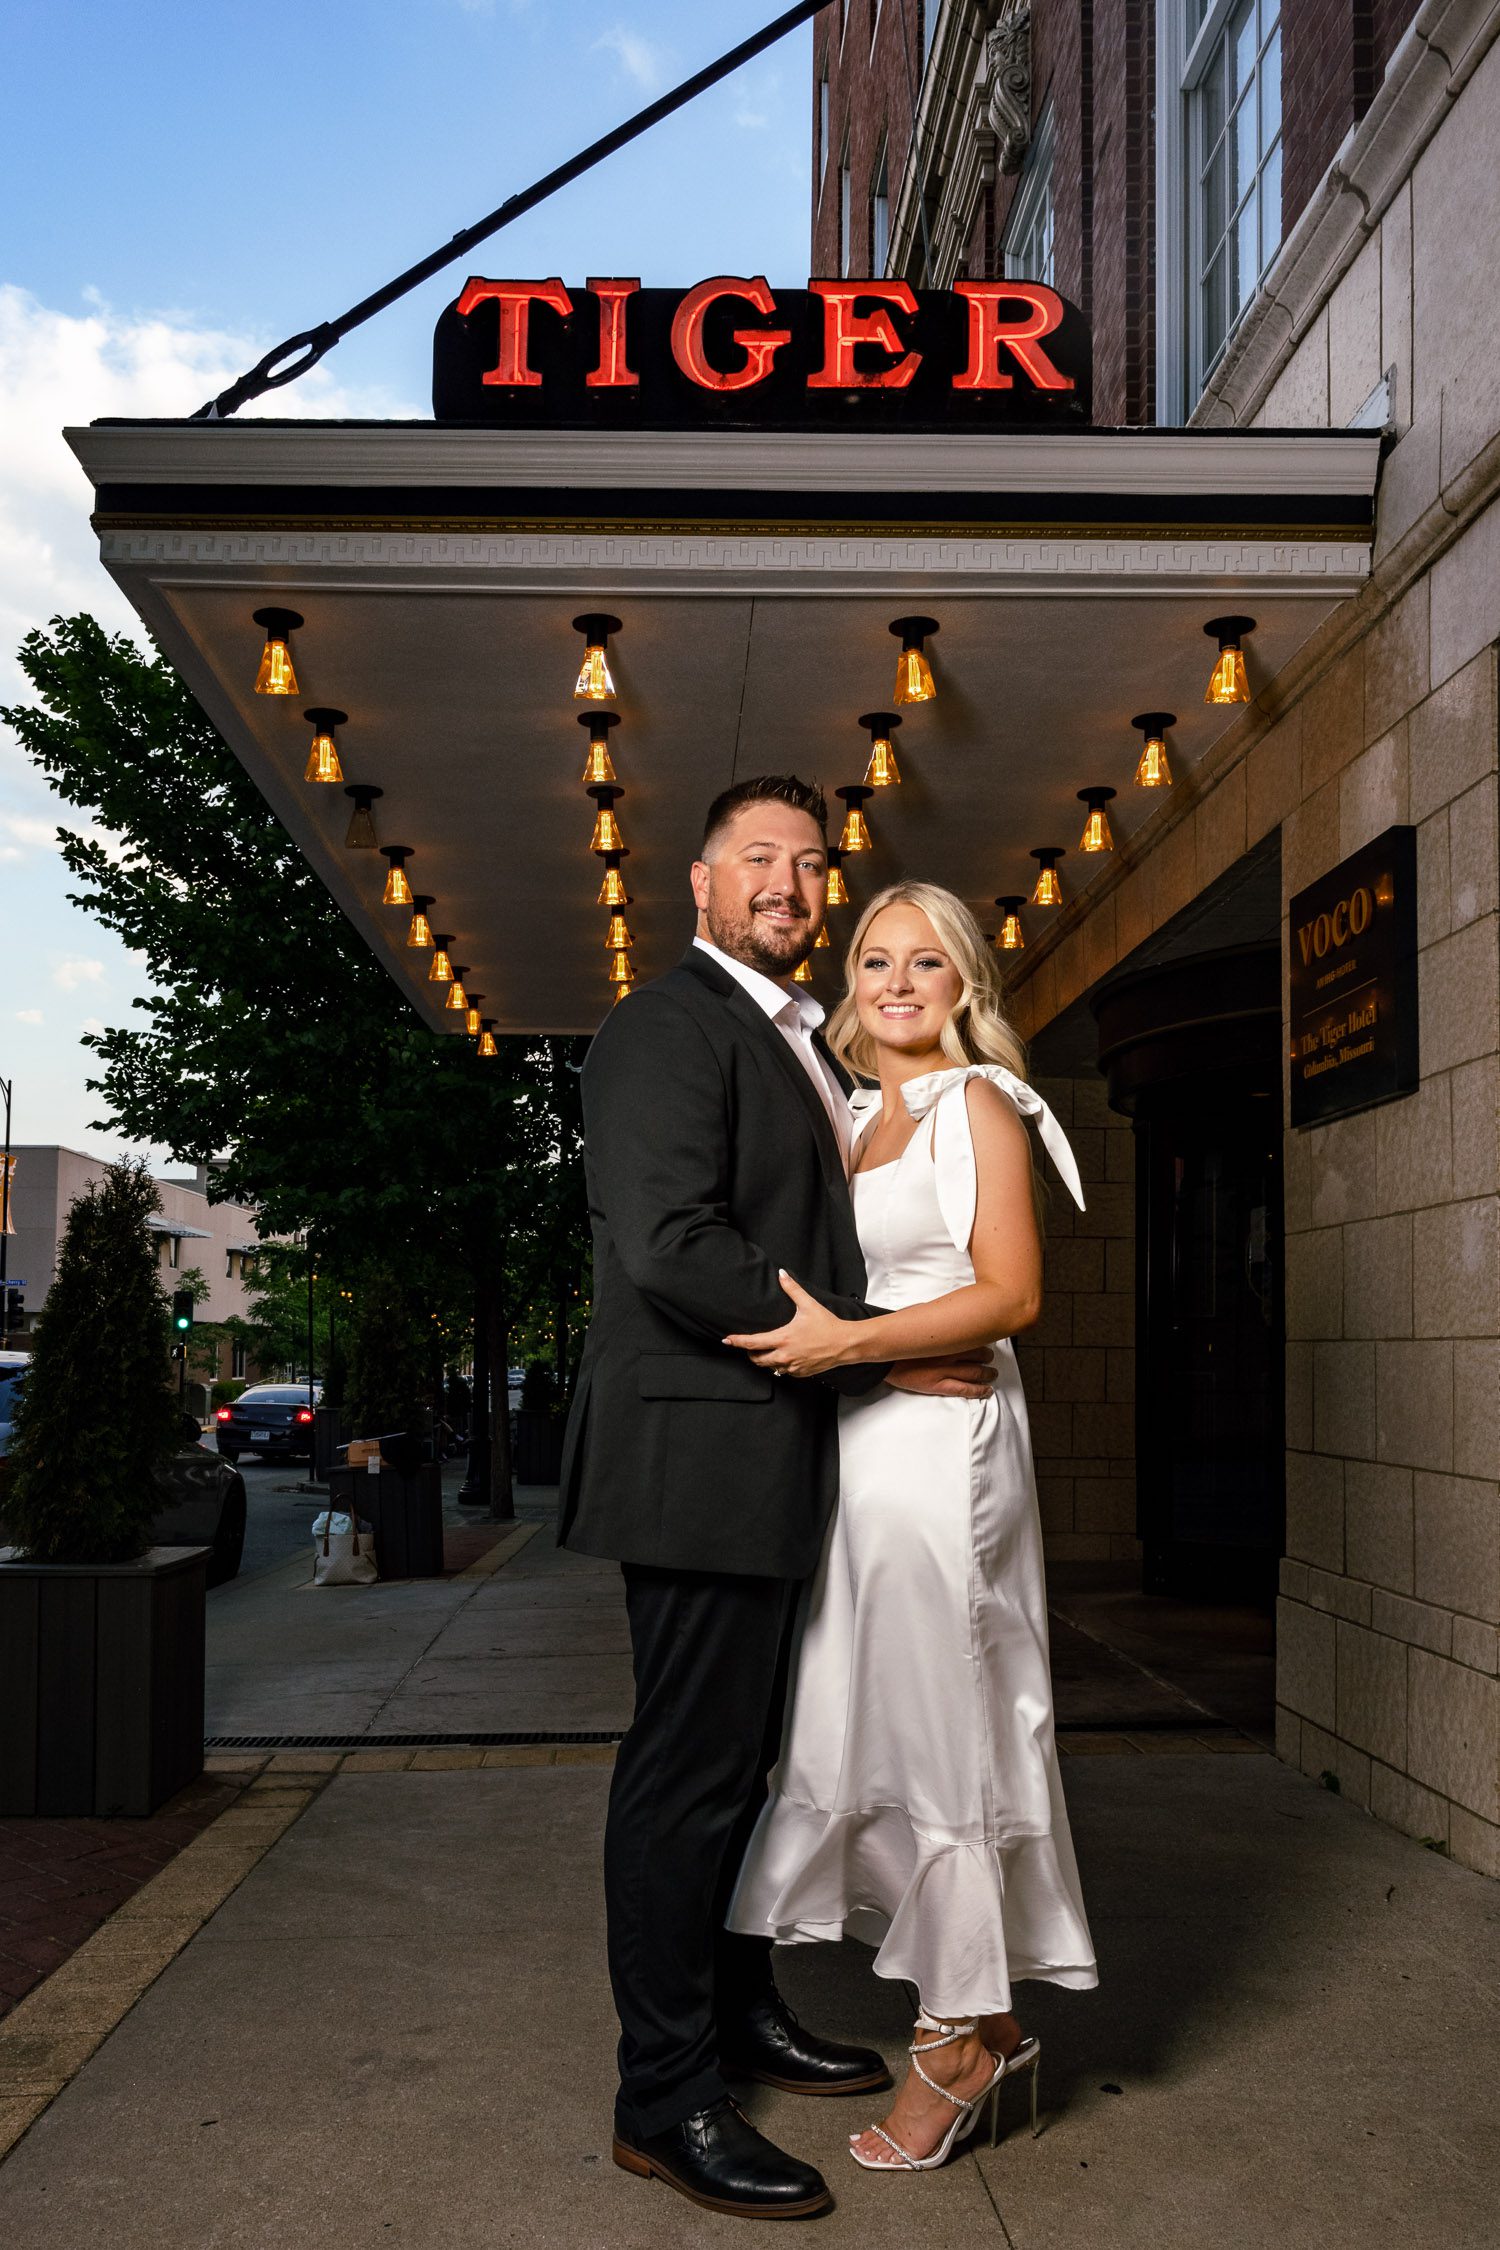 Couple pose under Tiger Hotel Neon Sign in Columbia, Missouri.